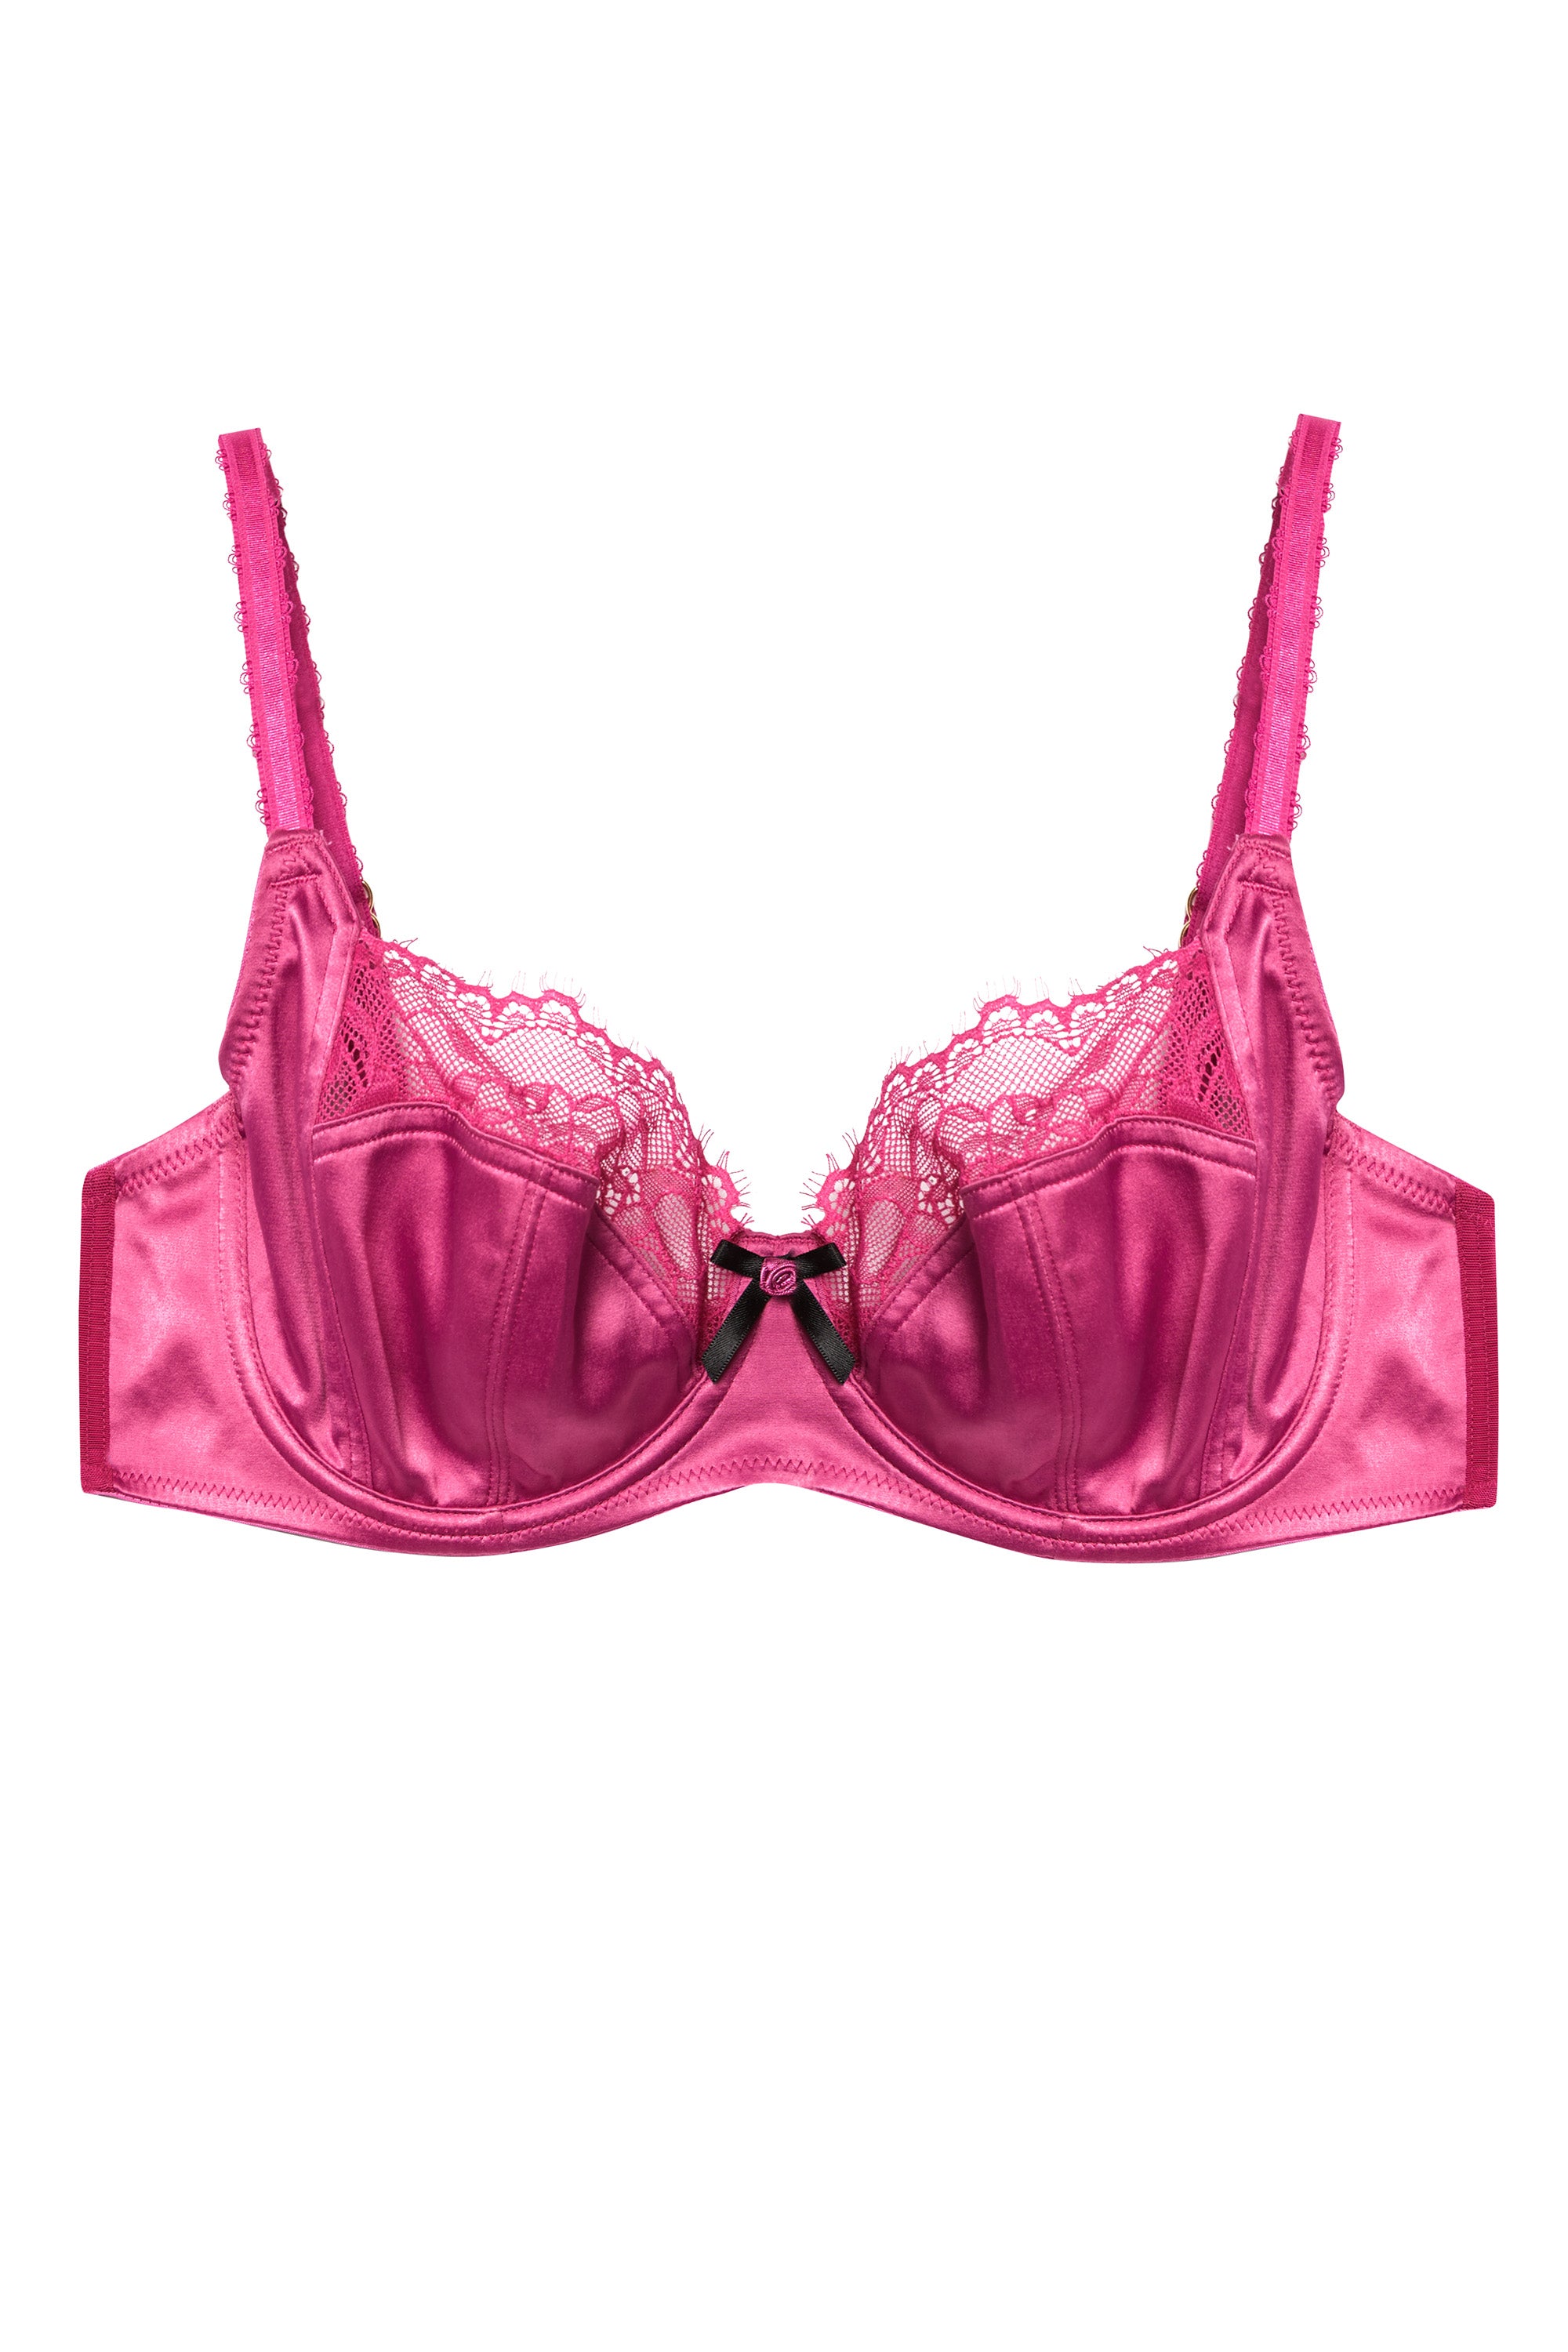 Rosalyn Magenta Satin Lace Bra - 32-40 bands and D-H cups (UK size)